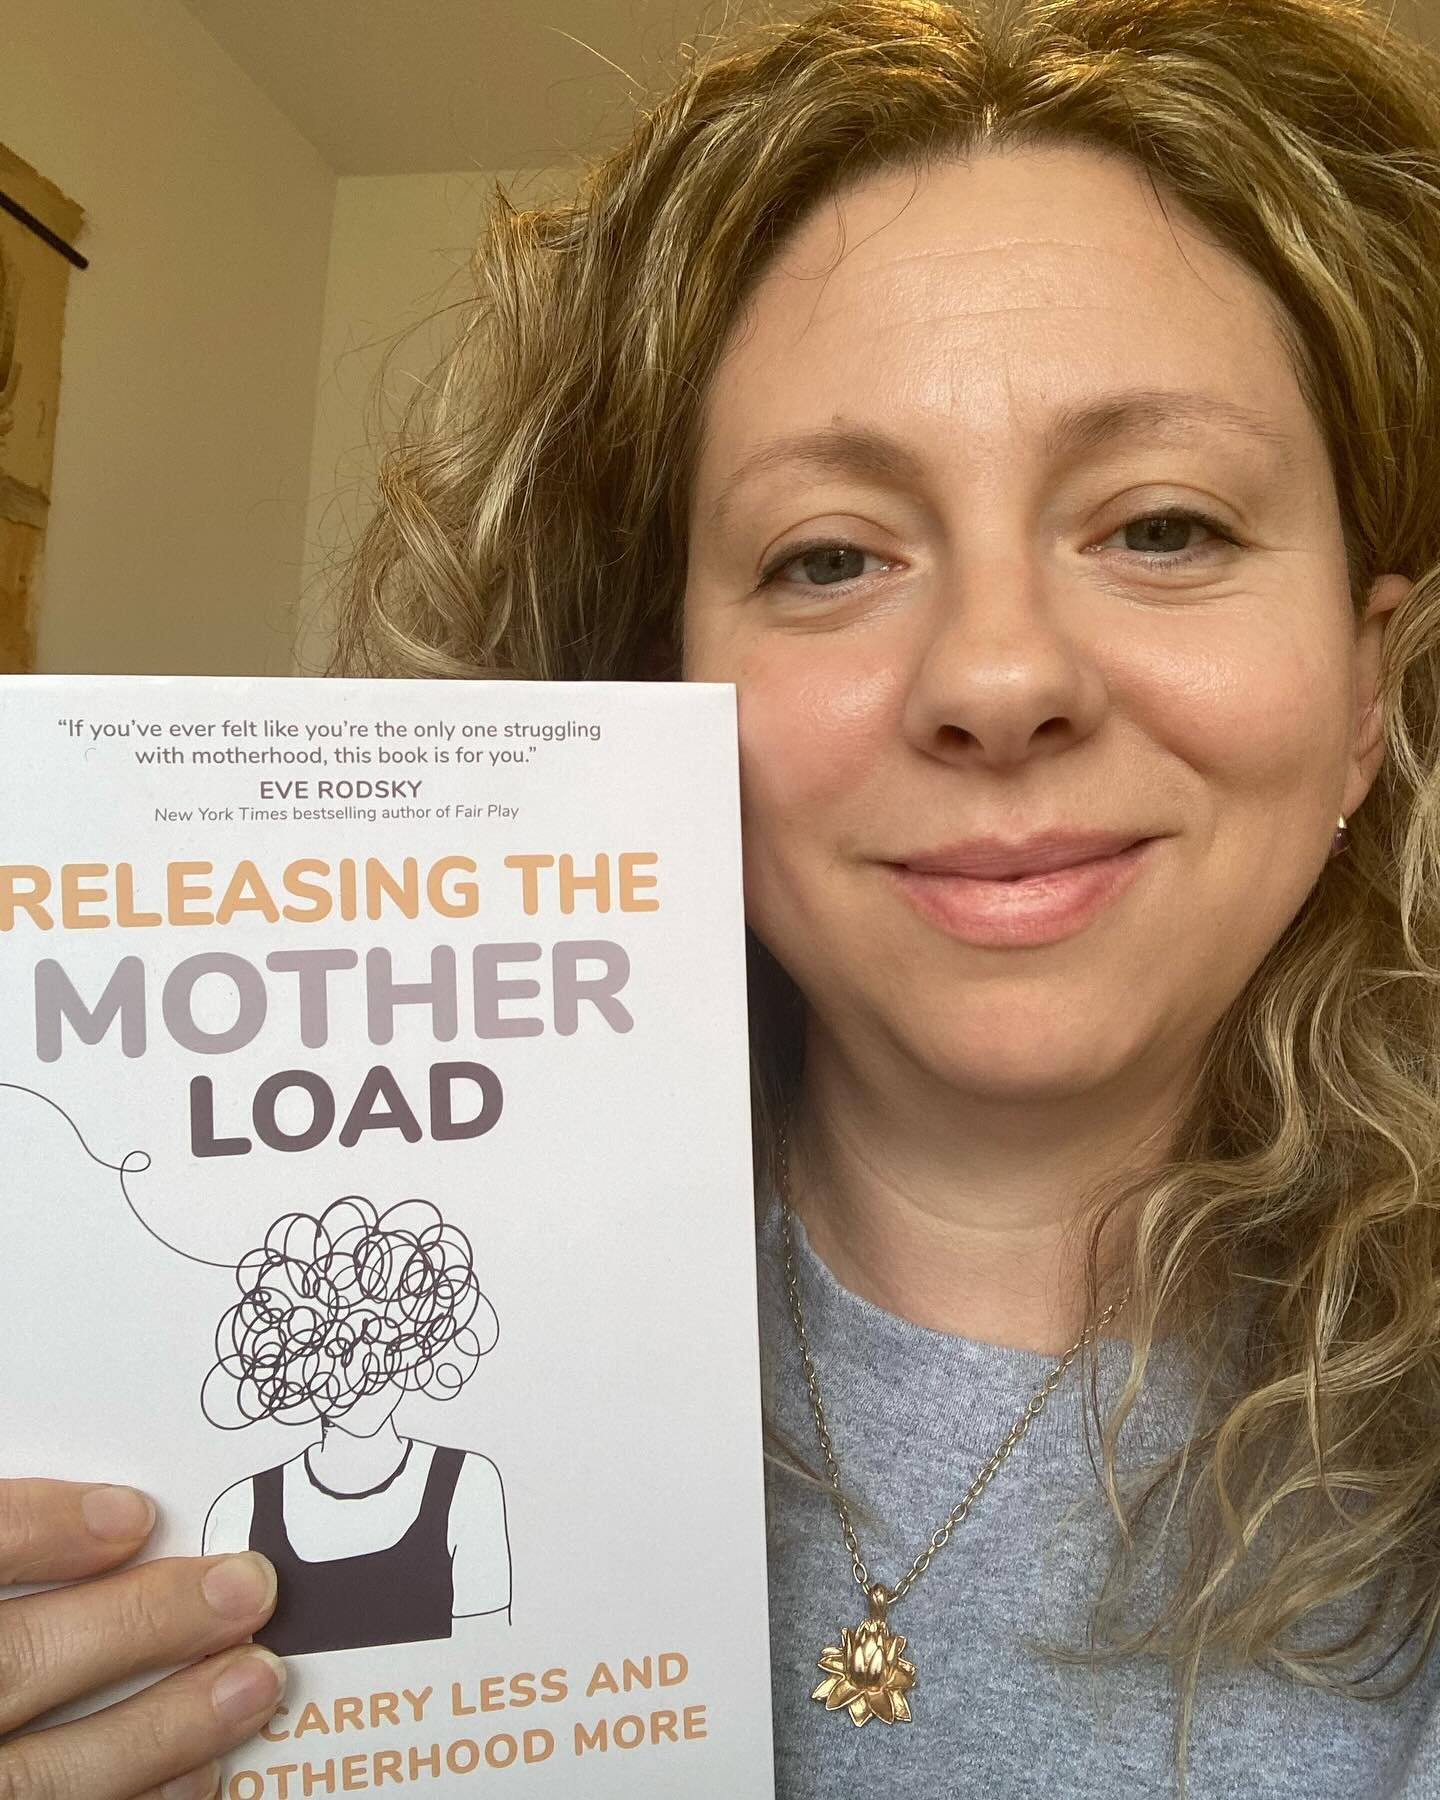 I am so excited to receive @momwell new book! I have yet to take a deep dive but I just love how Erica has outlined the various lists of invisible load we all carry. I feel so seen and validated just by looking at the lists 🤩 I was hoping to attend 